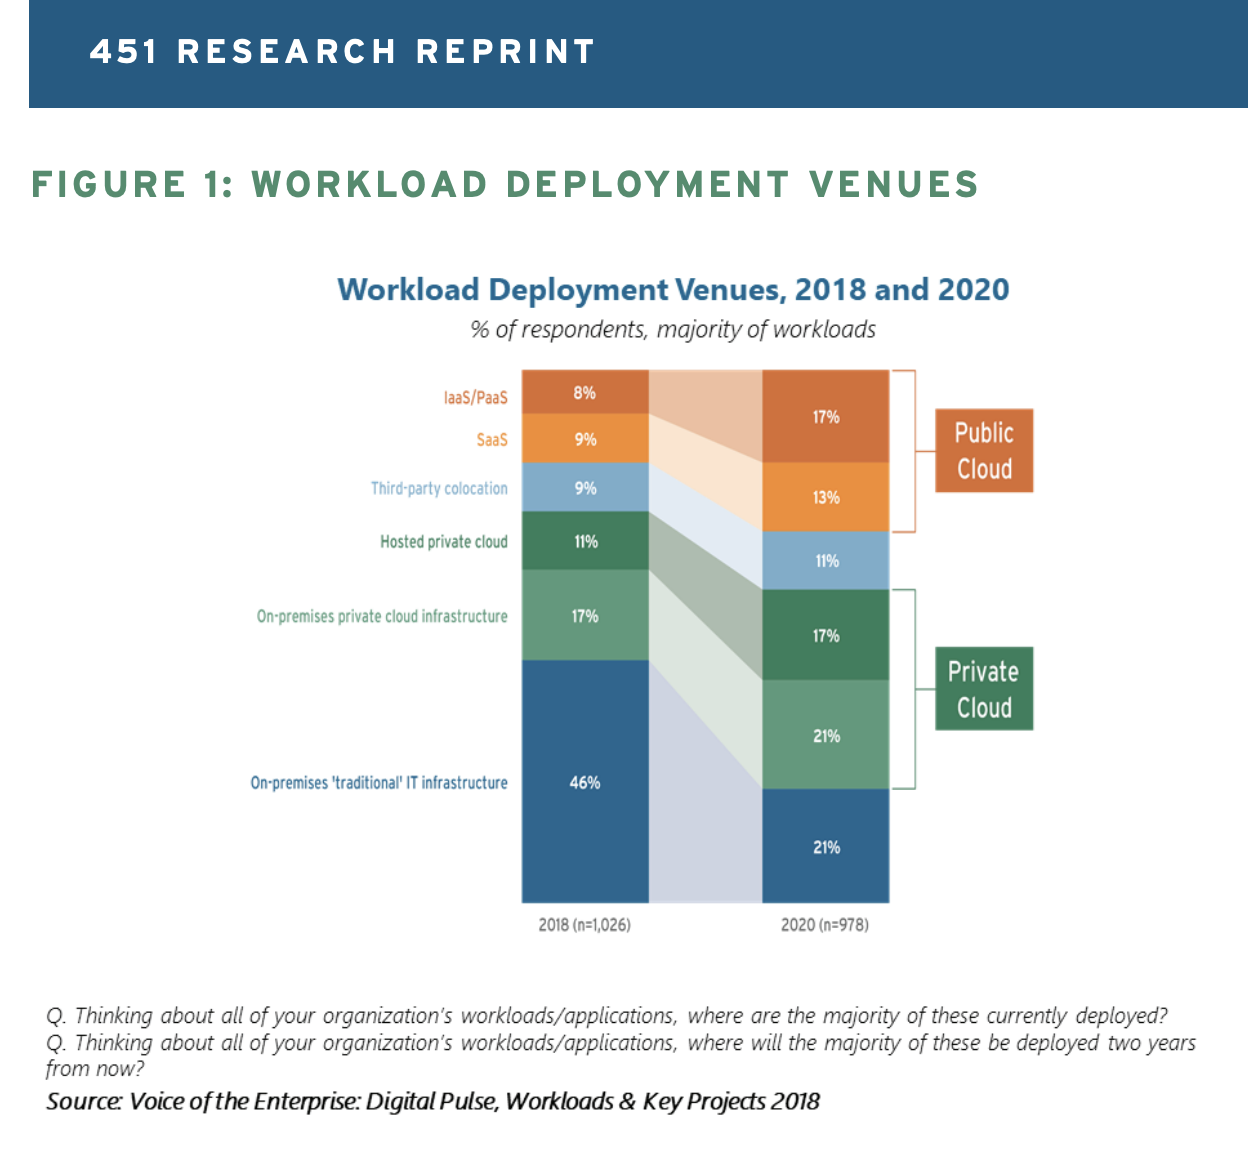 451 Research Reprint - Workload Deployment Venues 2018 and 2020